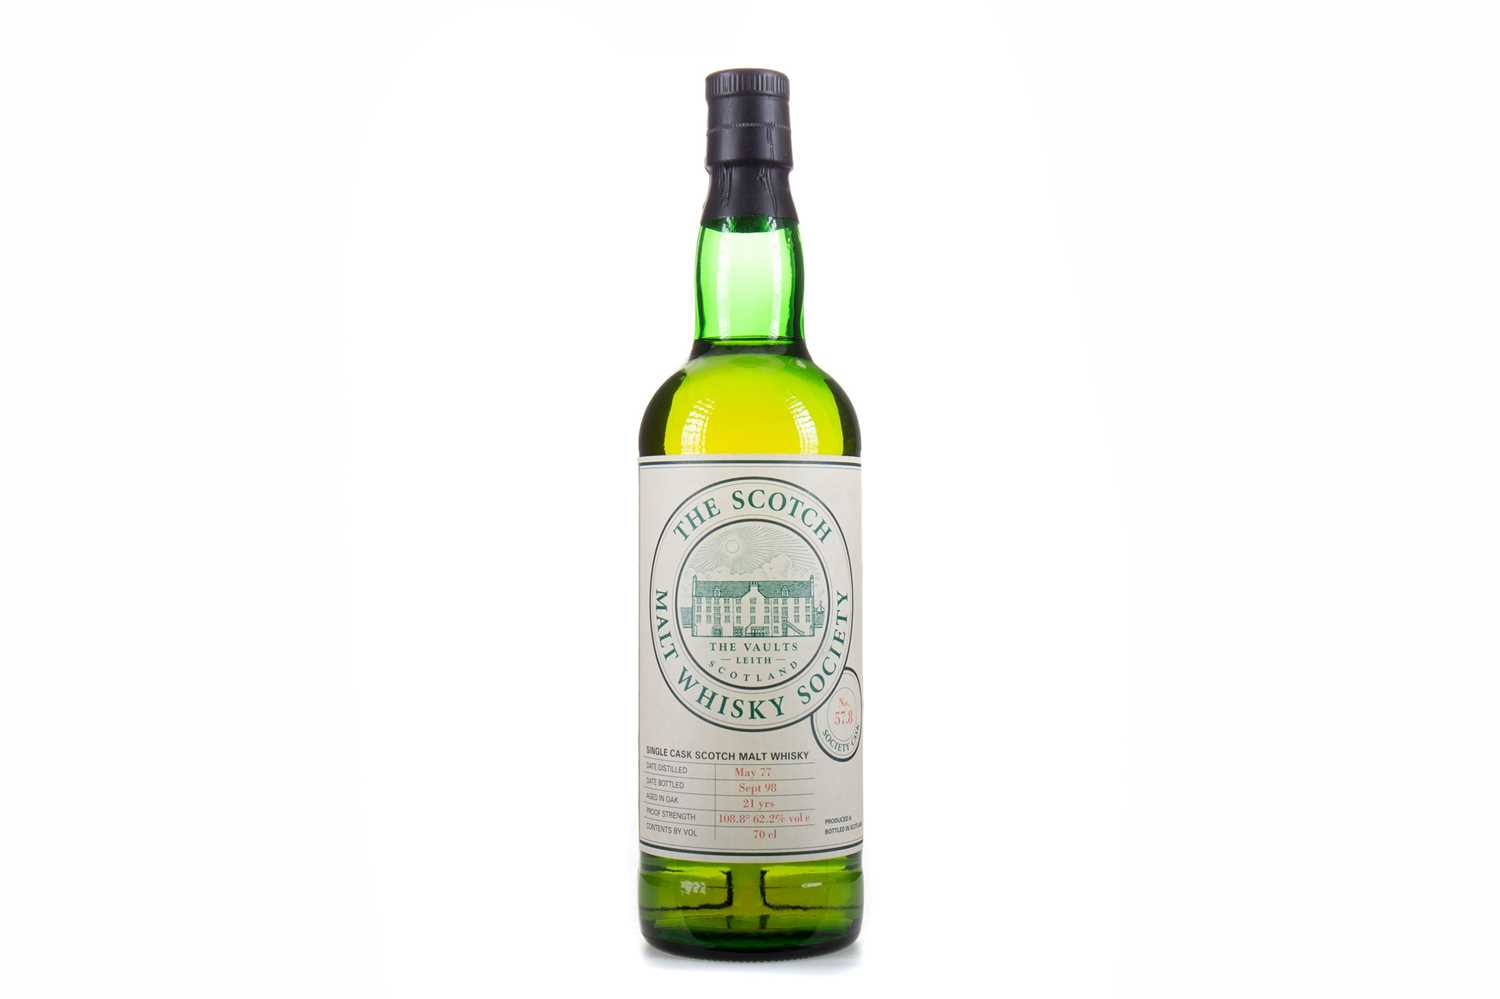 Lot 601 - SMWS 57.8 GLEN MHOR 1977 21 YEAR OLD